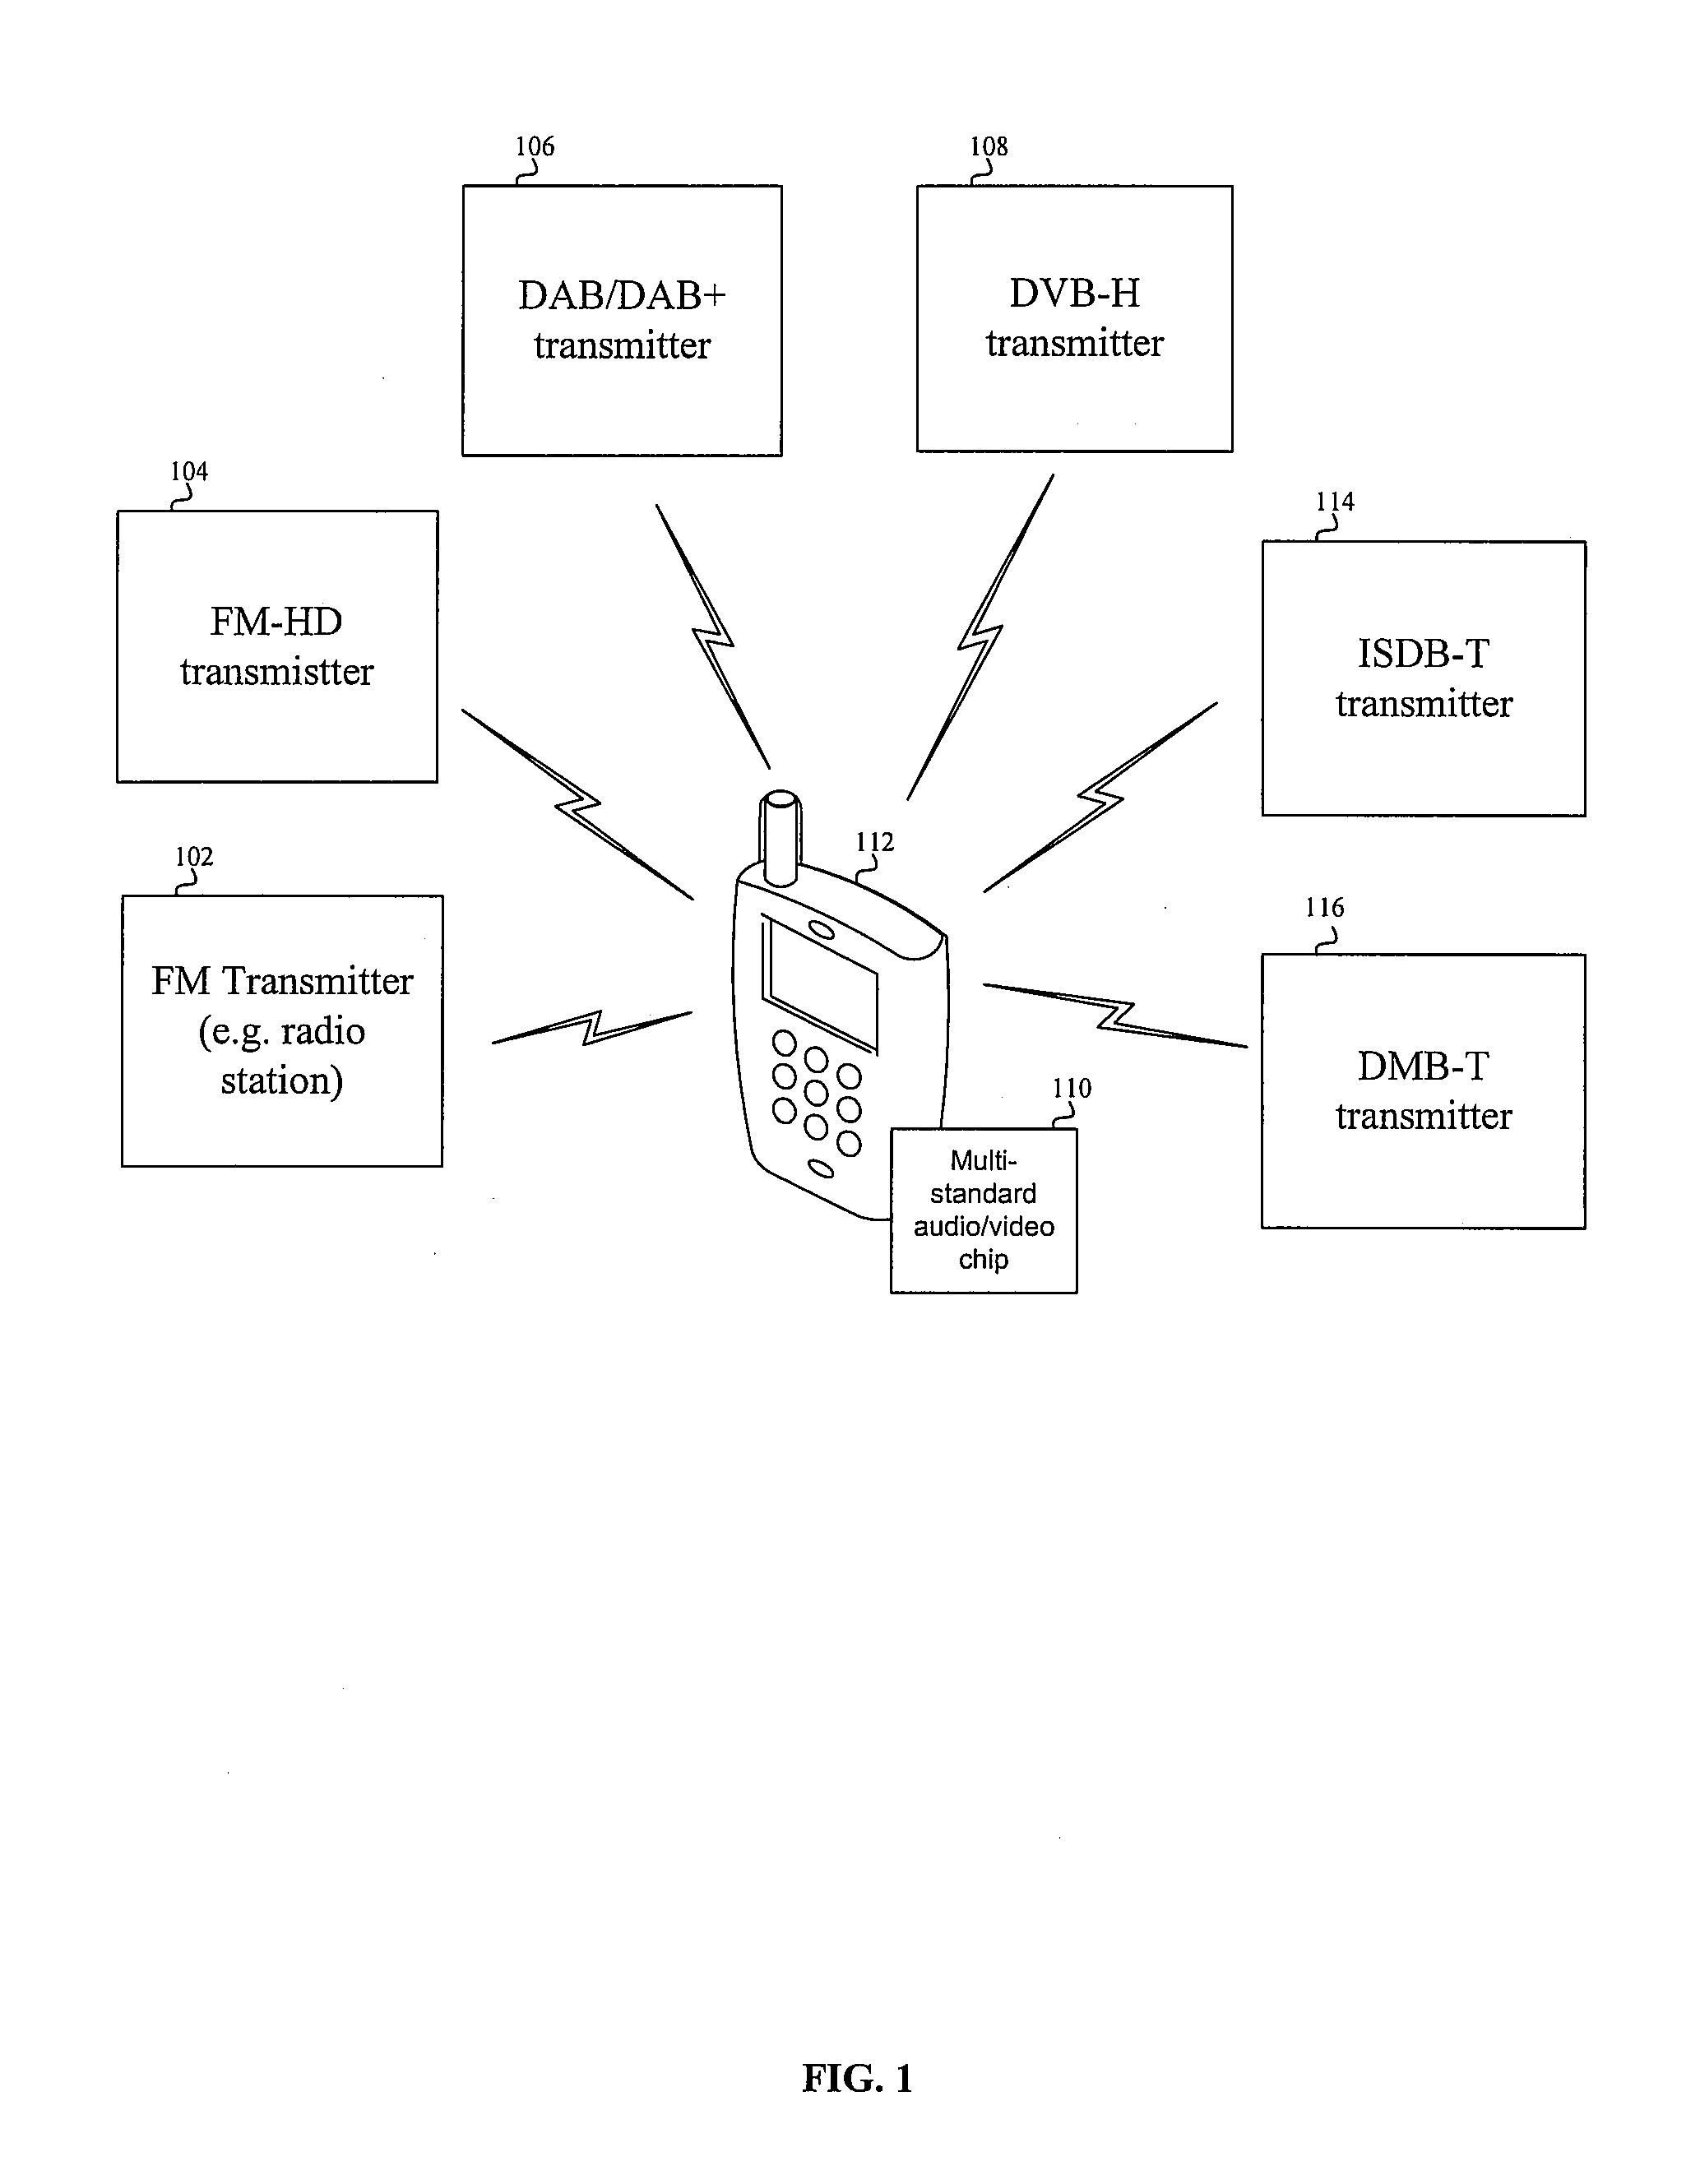 Method and system for an integrated multi-standard audio/video receiver